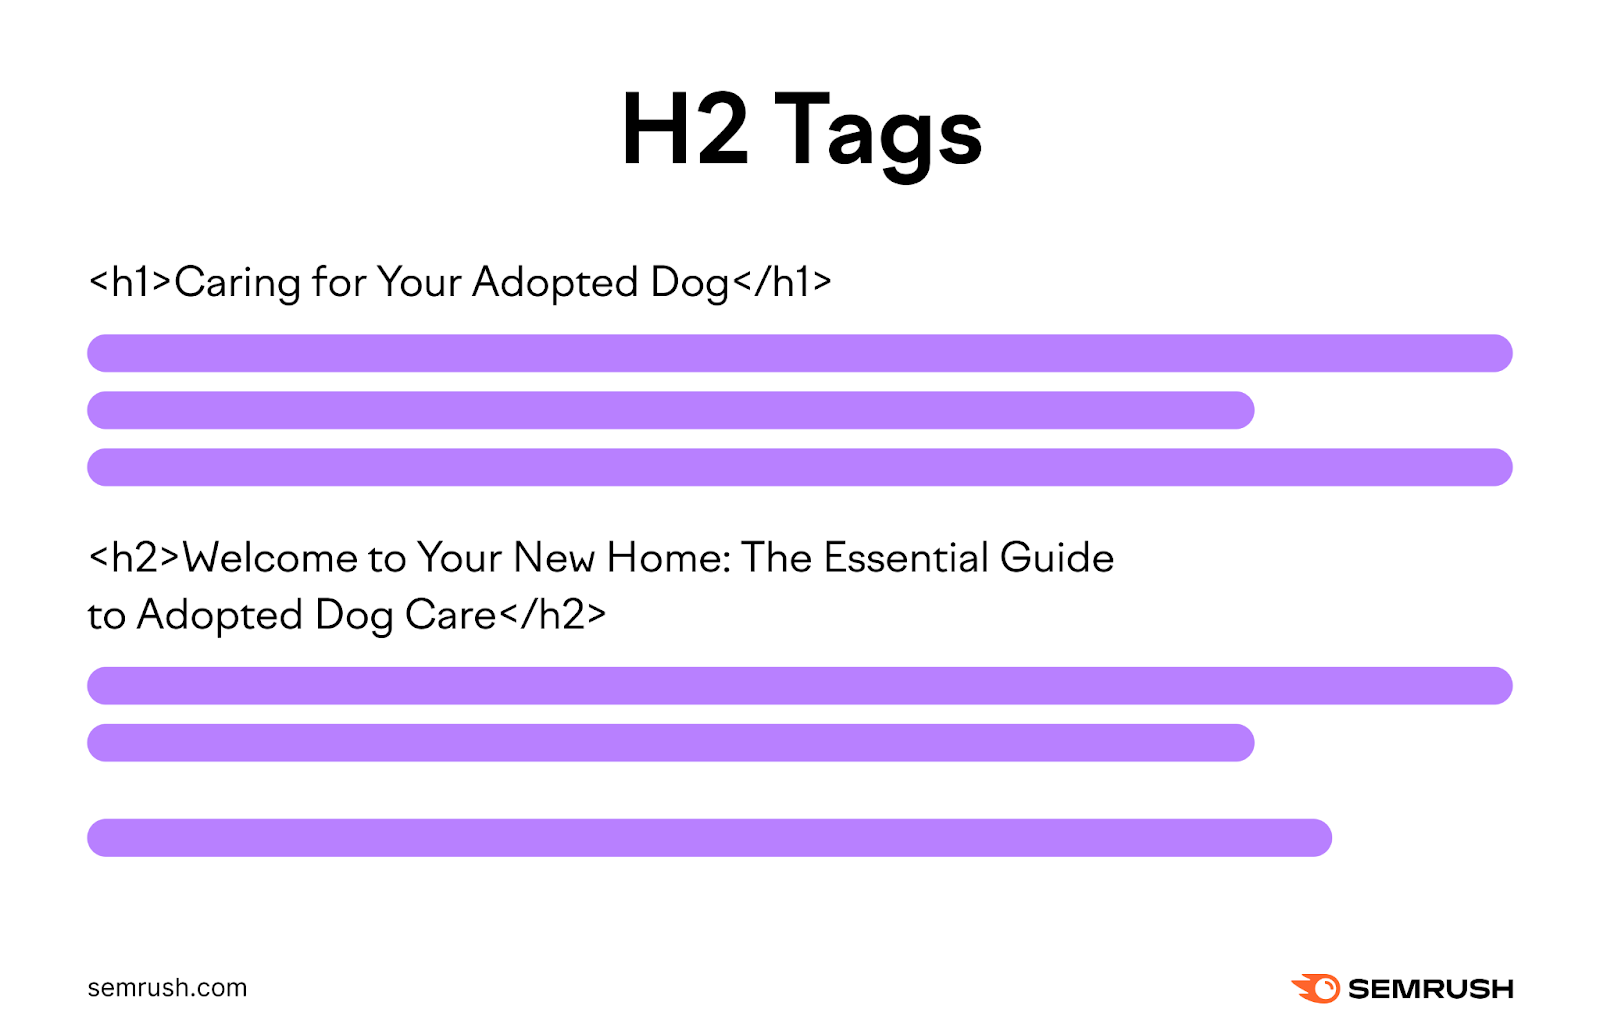 h2 header tag added beneath the h1 tag. the h2 tag says the essential guide to adopted dog care.